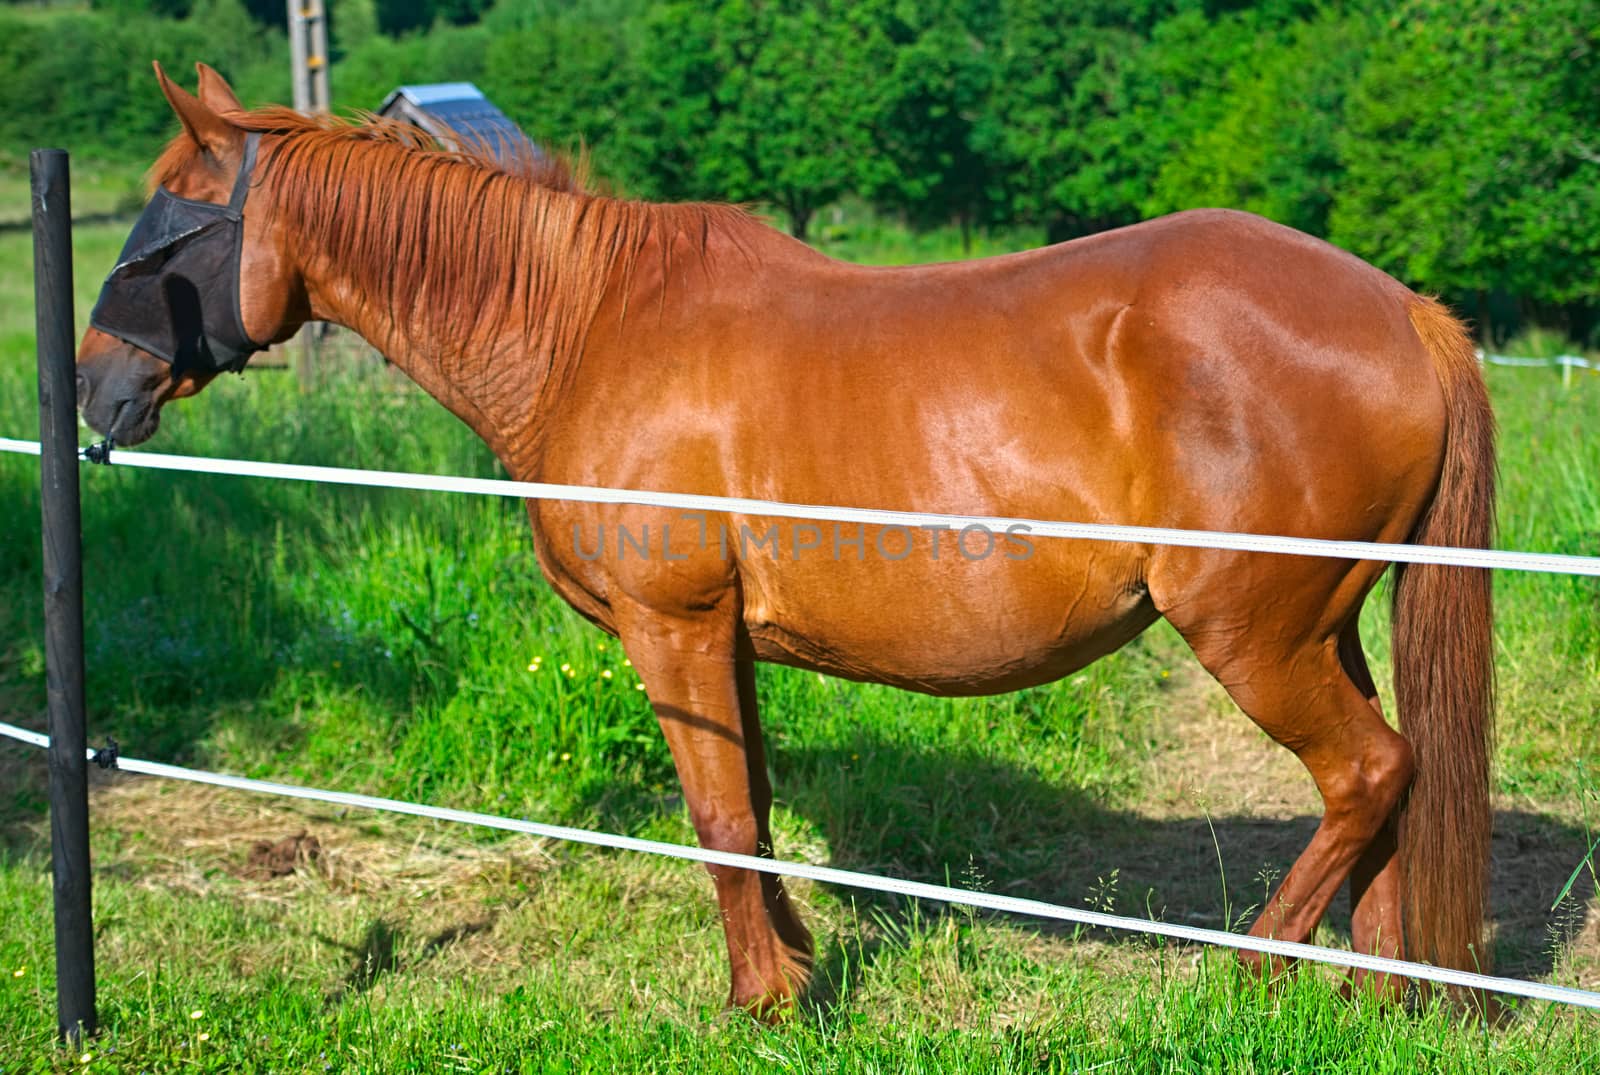 Brown horse with protection mask standing behind simple fence by sheriffkule